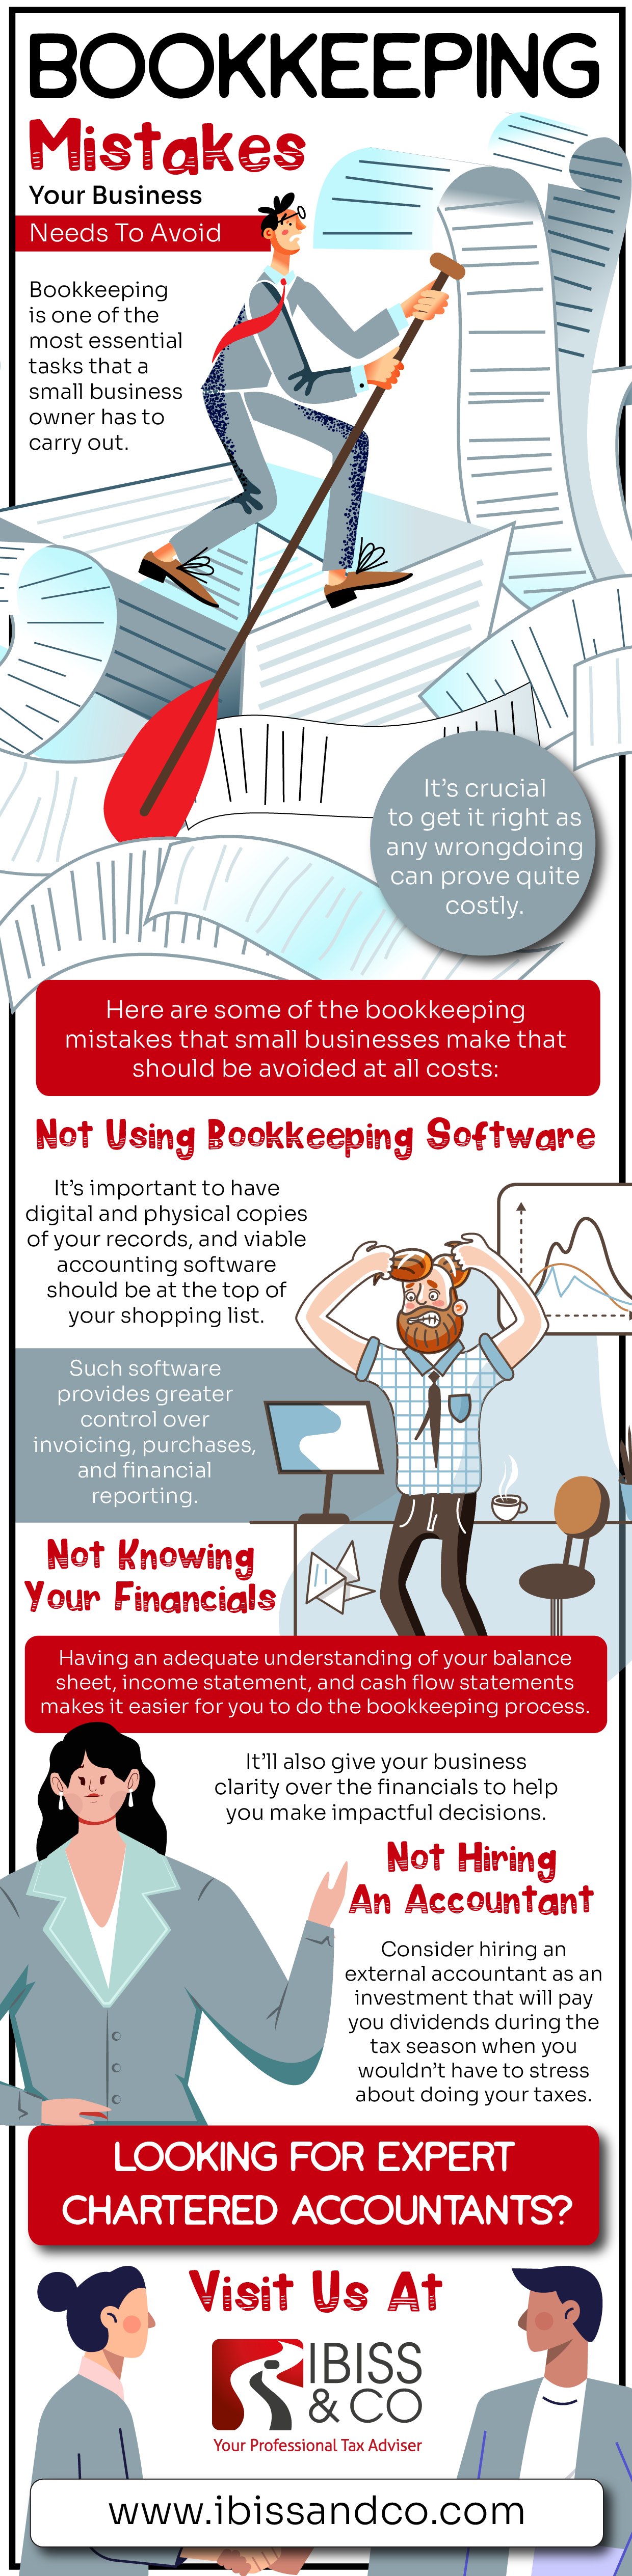 Bookkeeping Mistakes Your Business Needs To Avoid